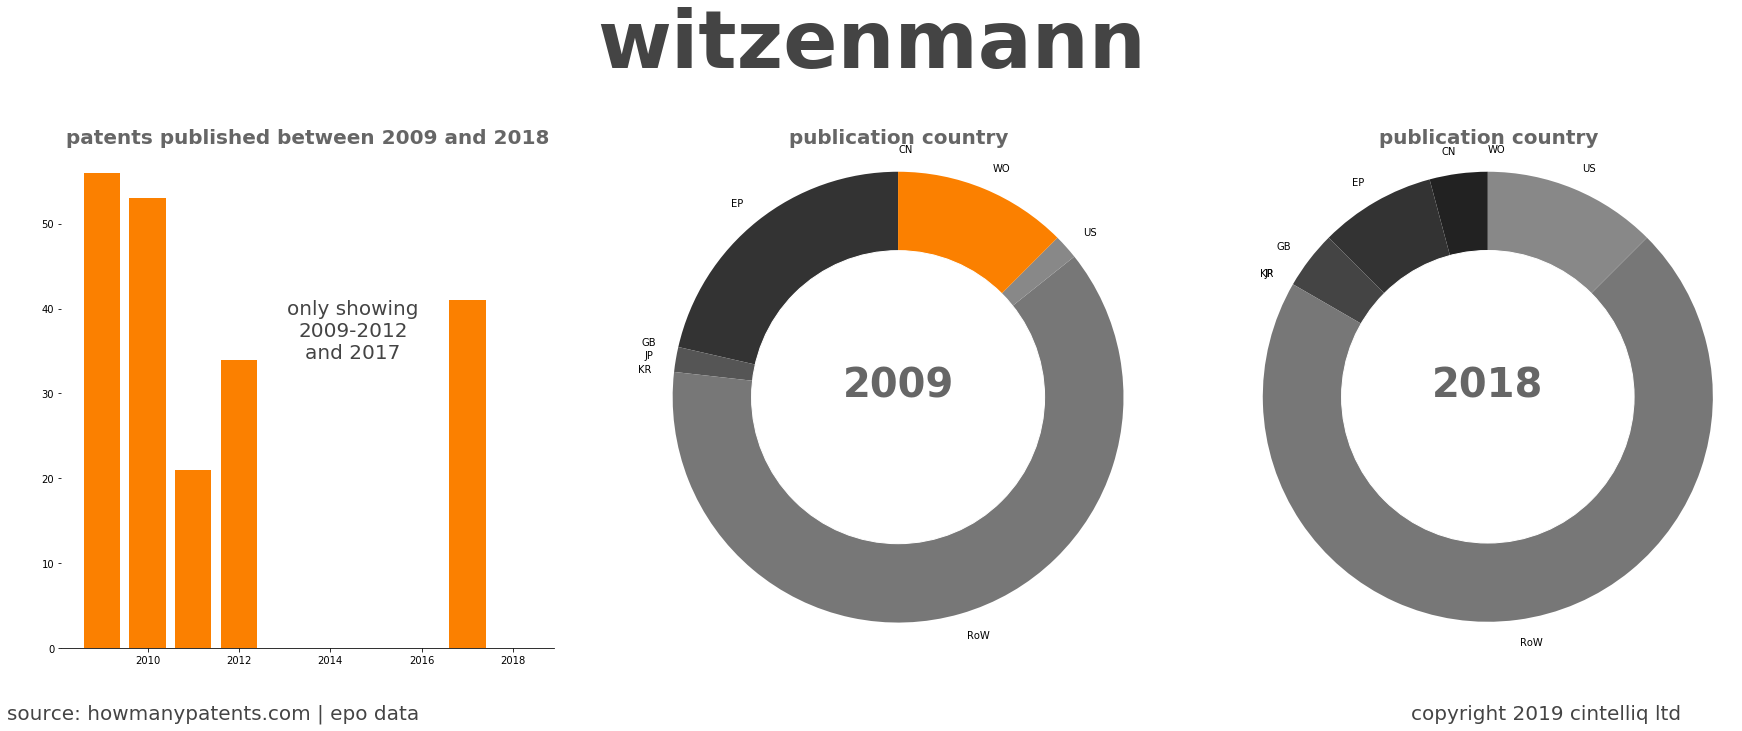 summary of patents for Witzenmann